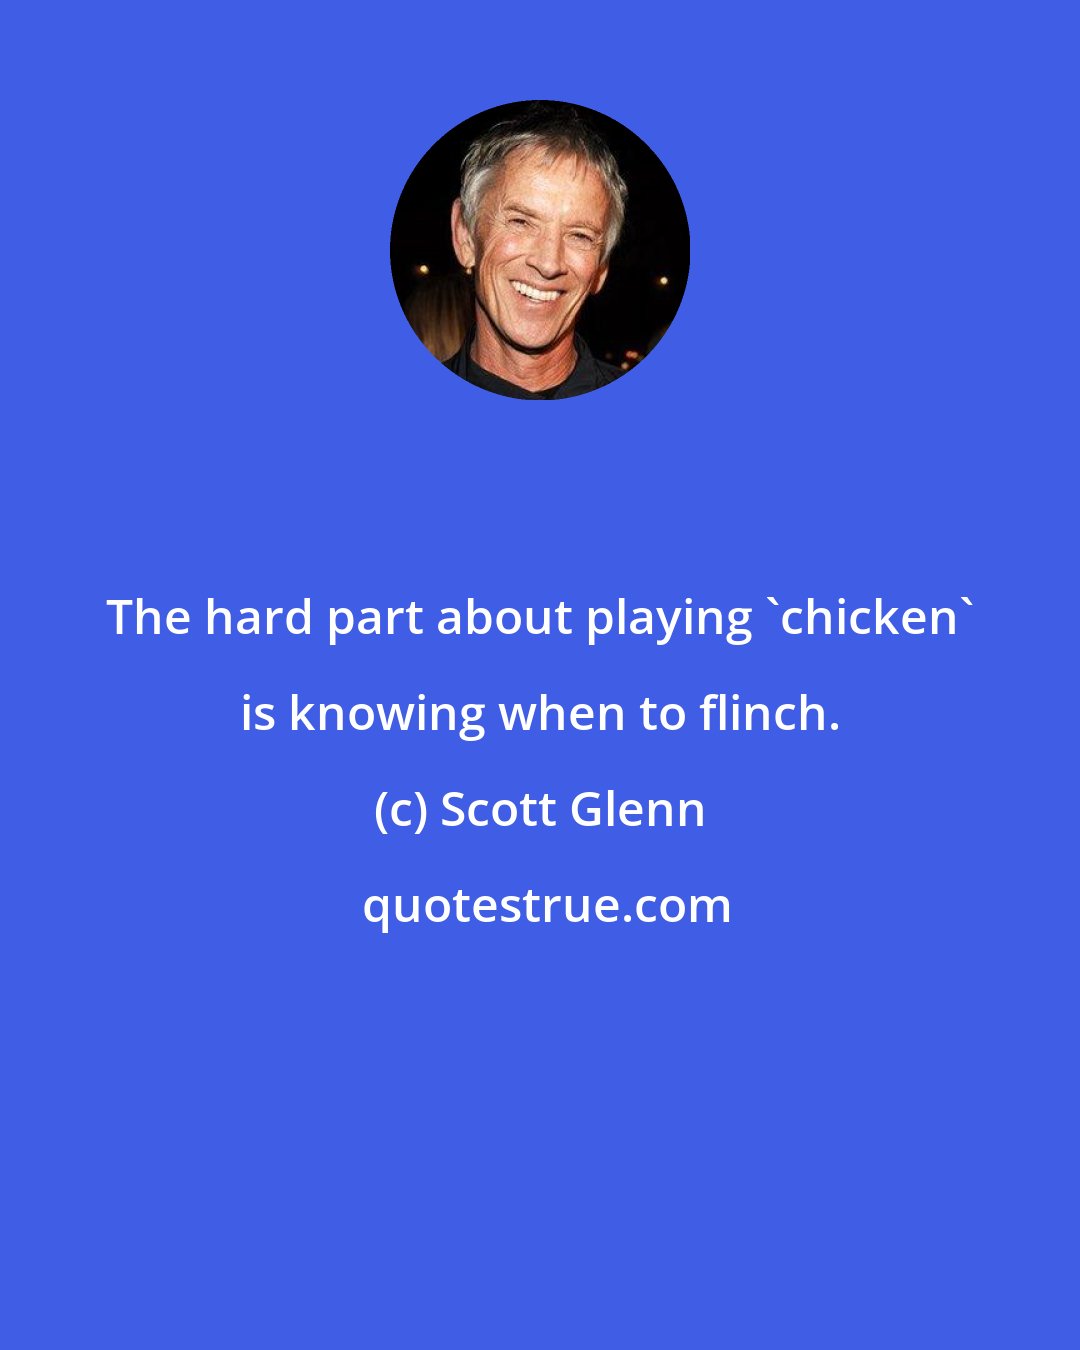 Scott Glenn: The hard part about playing 'chicken' is knowing when to flinch.